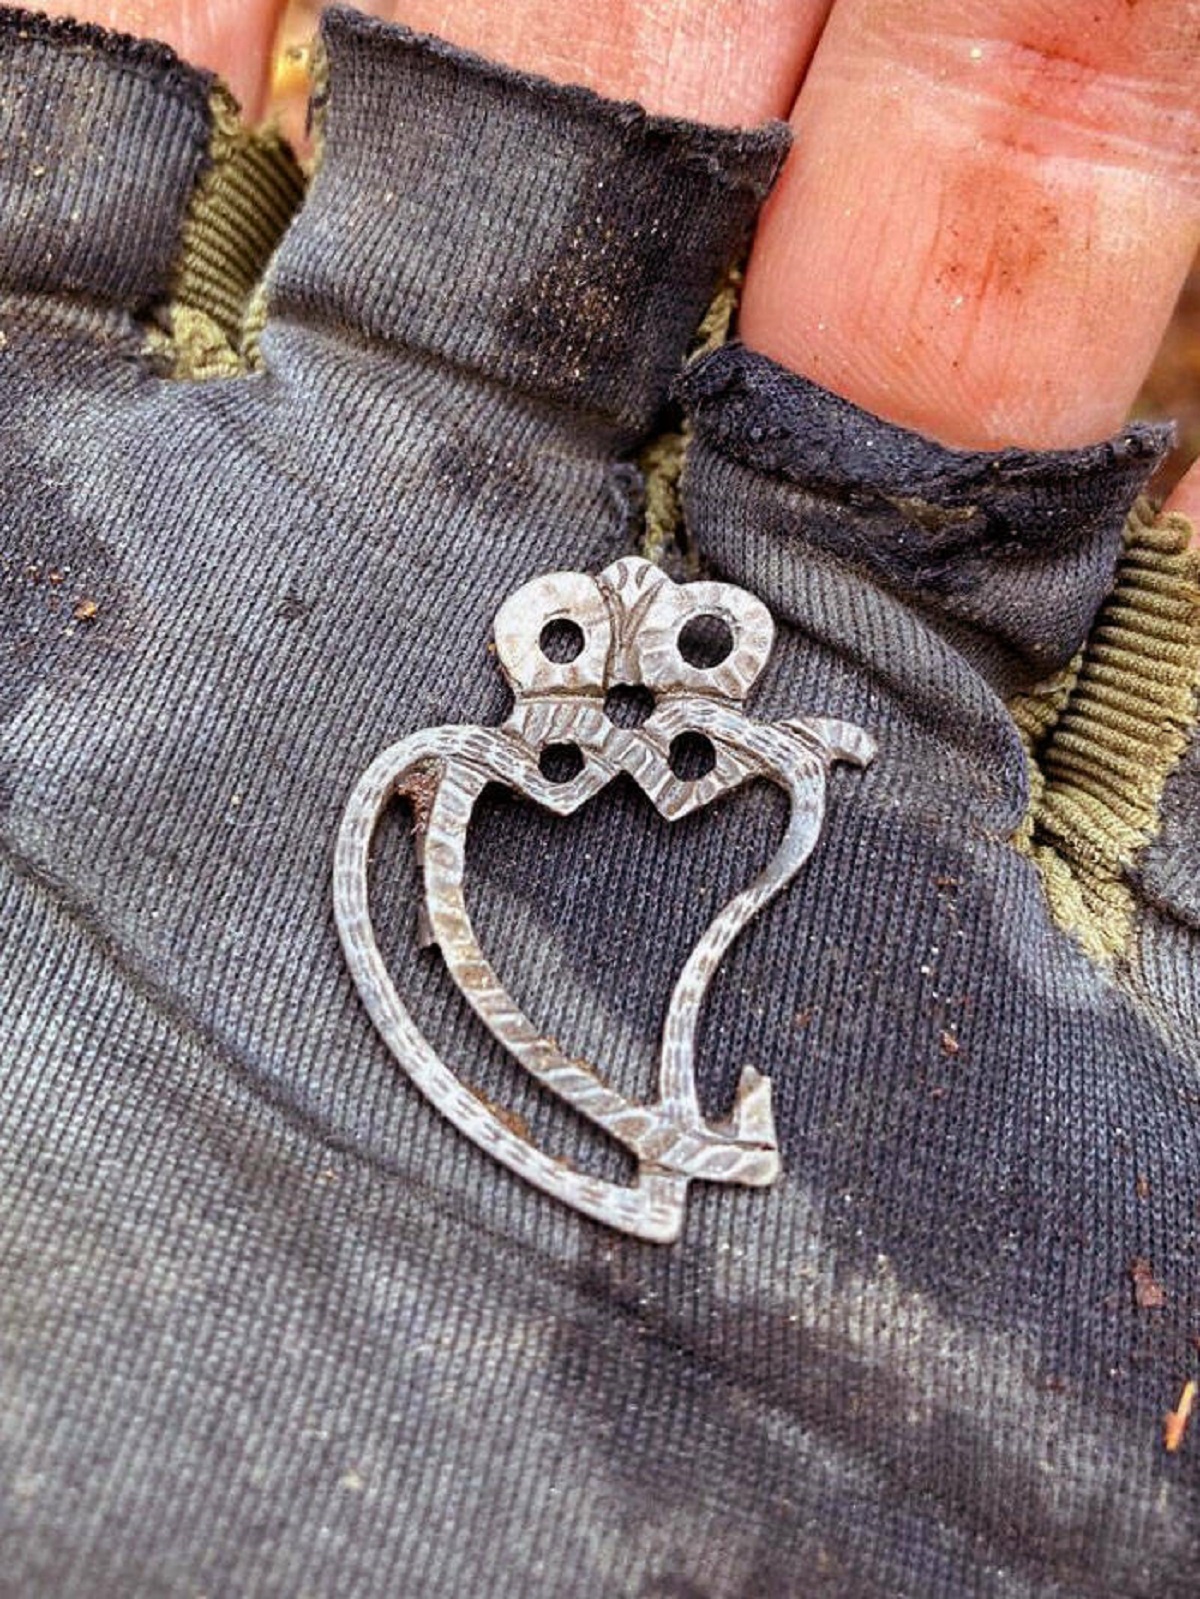 "This Silver Pin I Found While Metal Detecting Is Called A Luckenbooth Brooch. Scottish Tradition But Likely Traded With Native Americans 300 Years Ago"